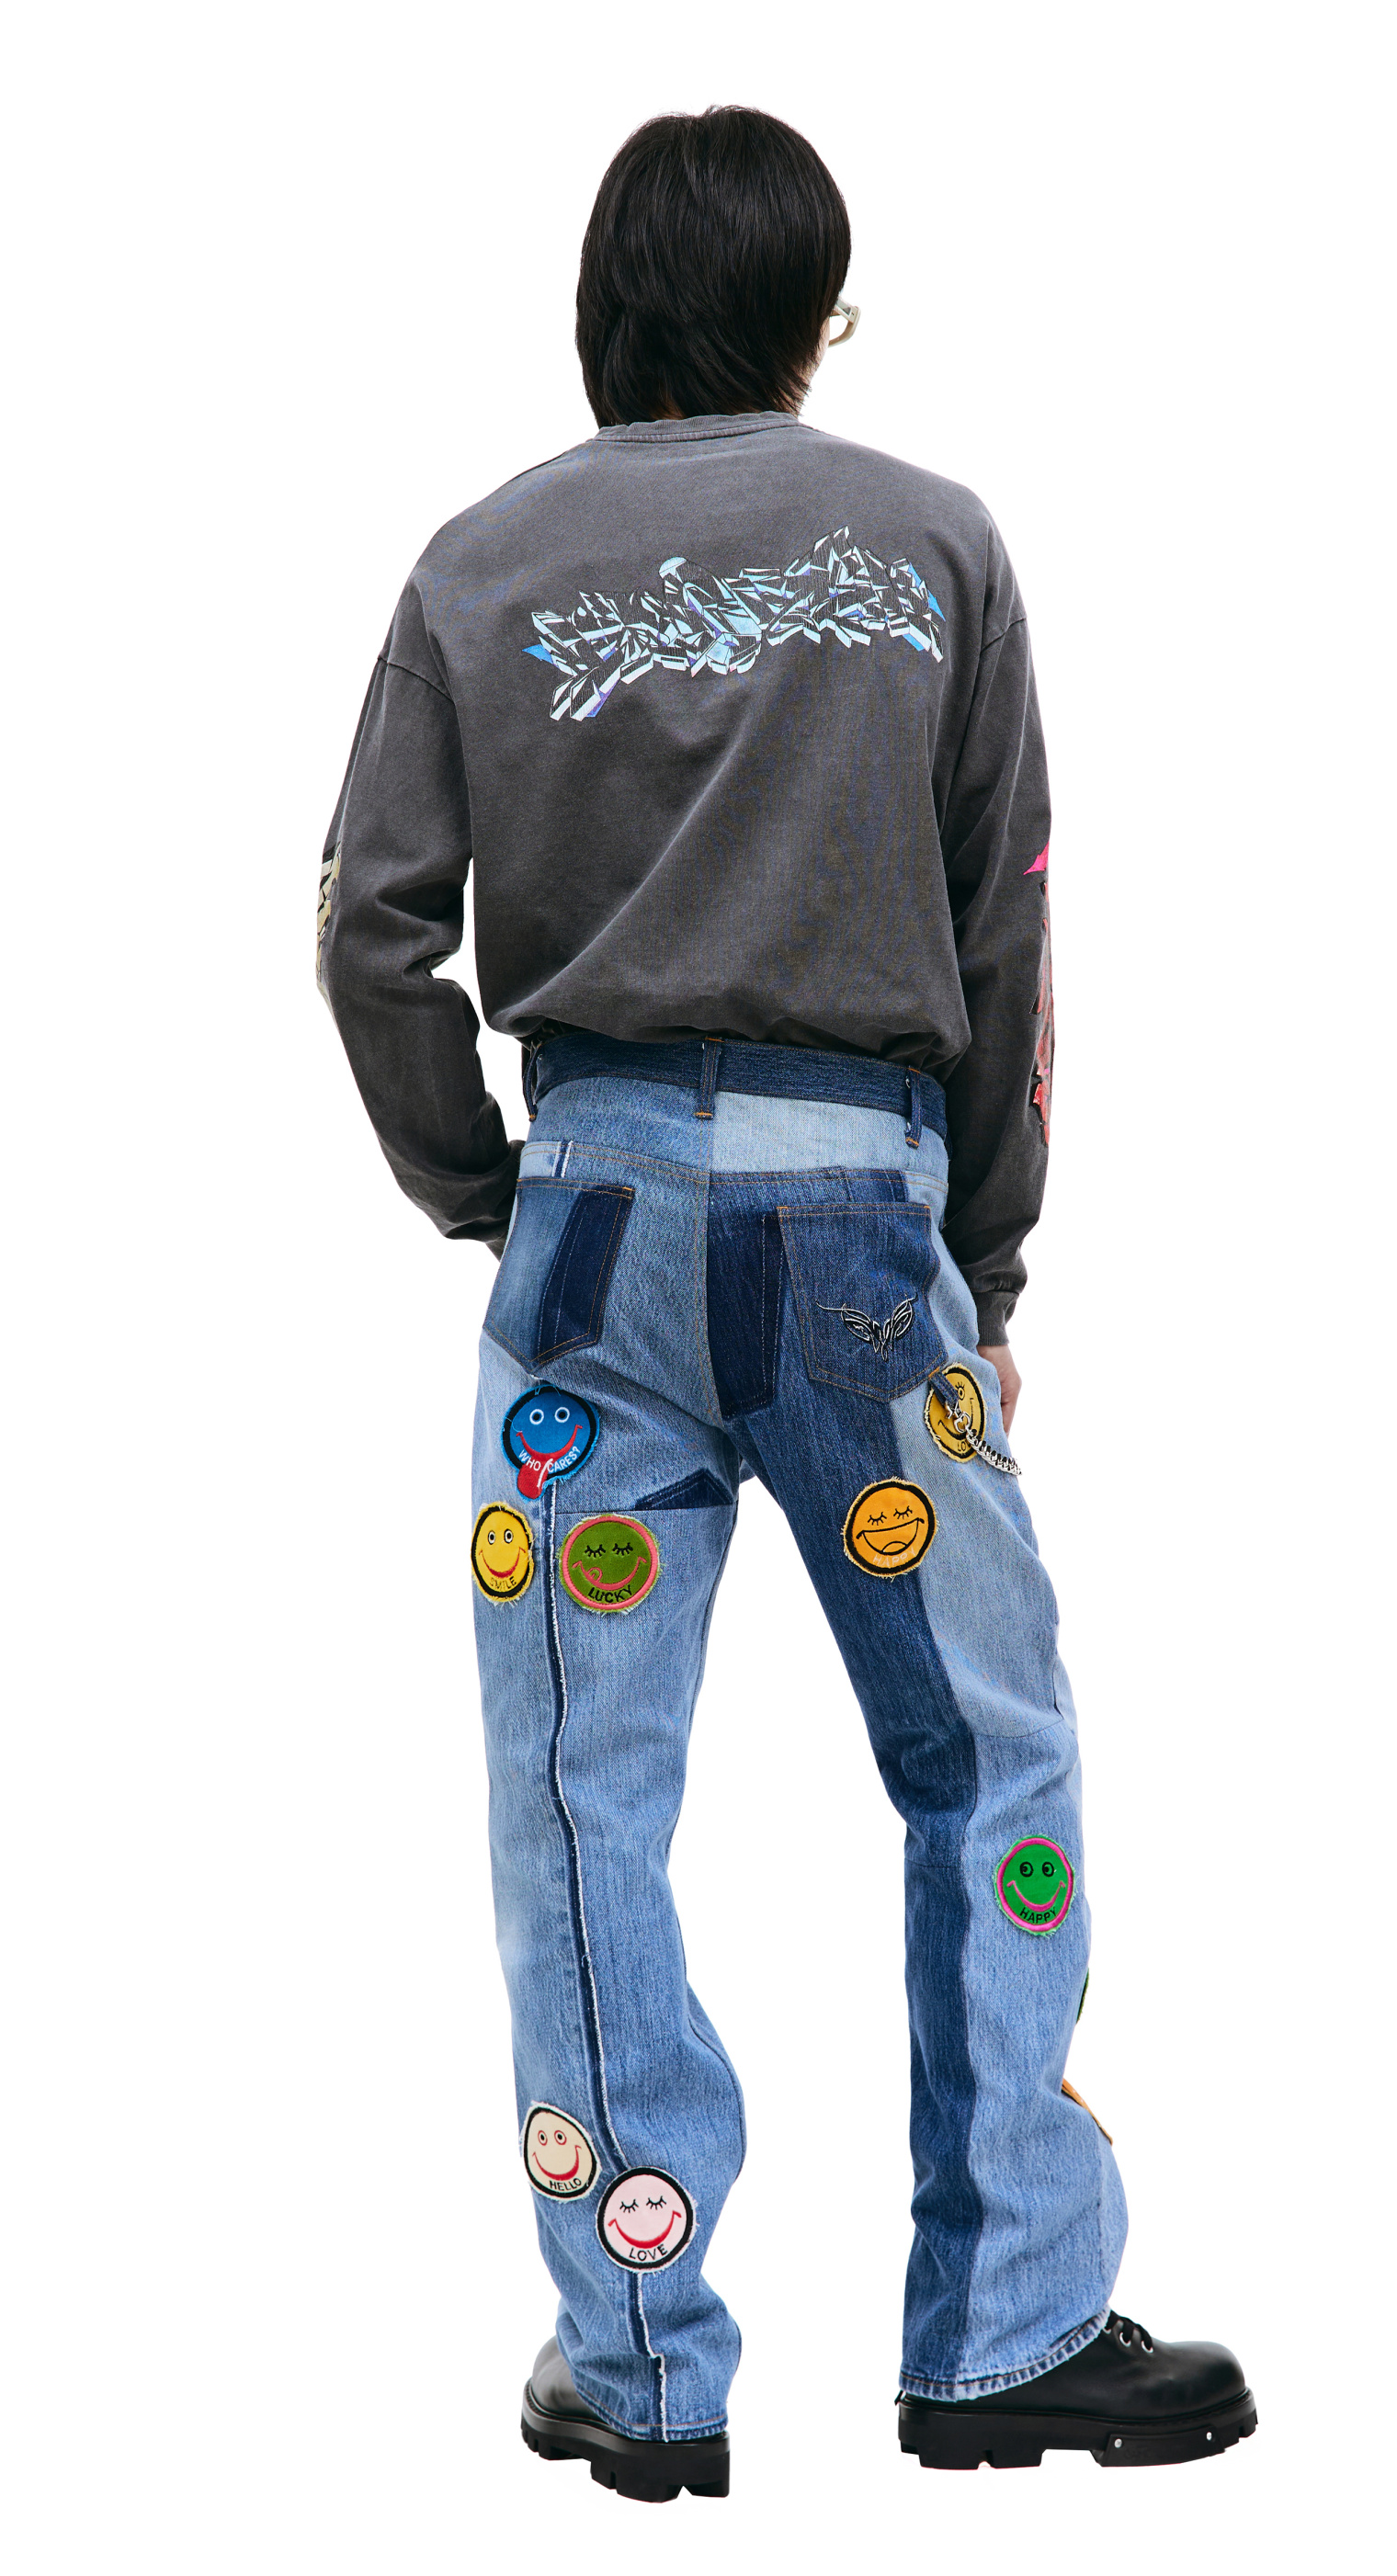 Children of the discordance Patched jeans